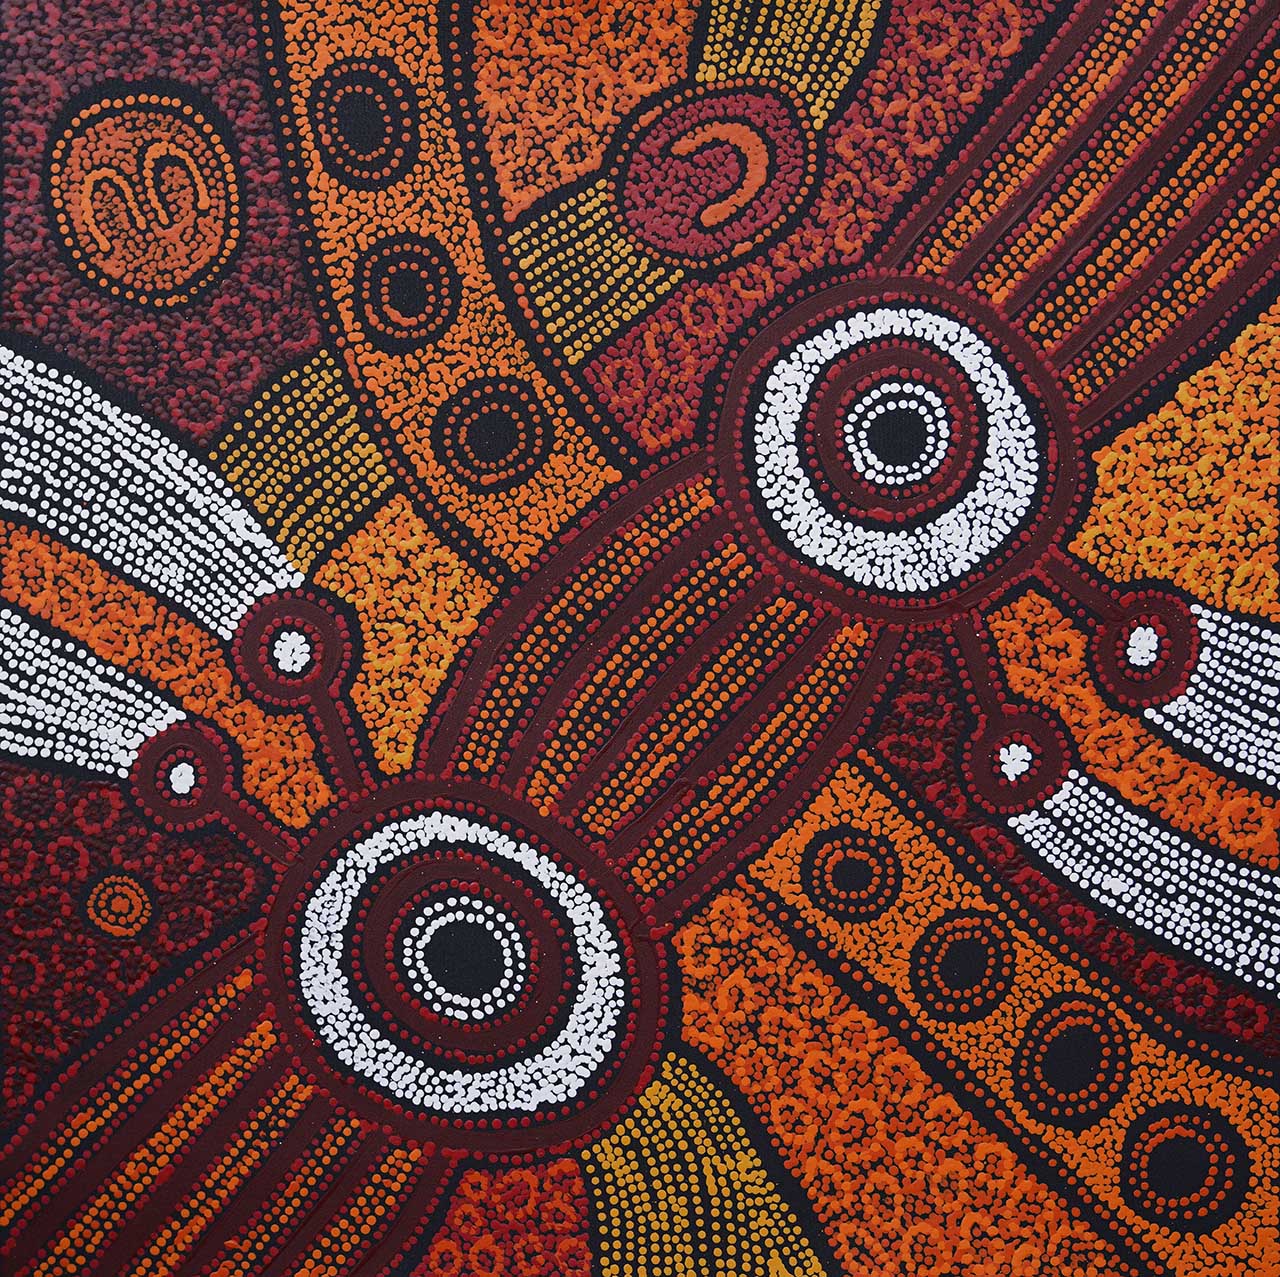 Selling art is important for artisits like Clarise Tunkin from the remote APY Lands in South Australia.